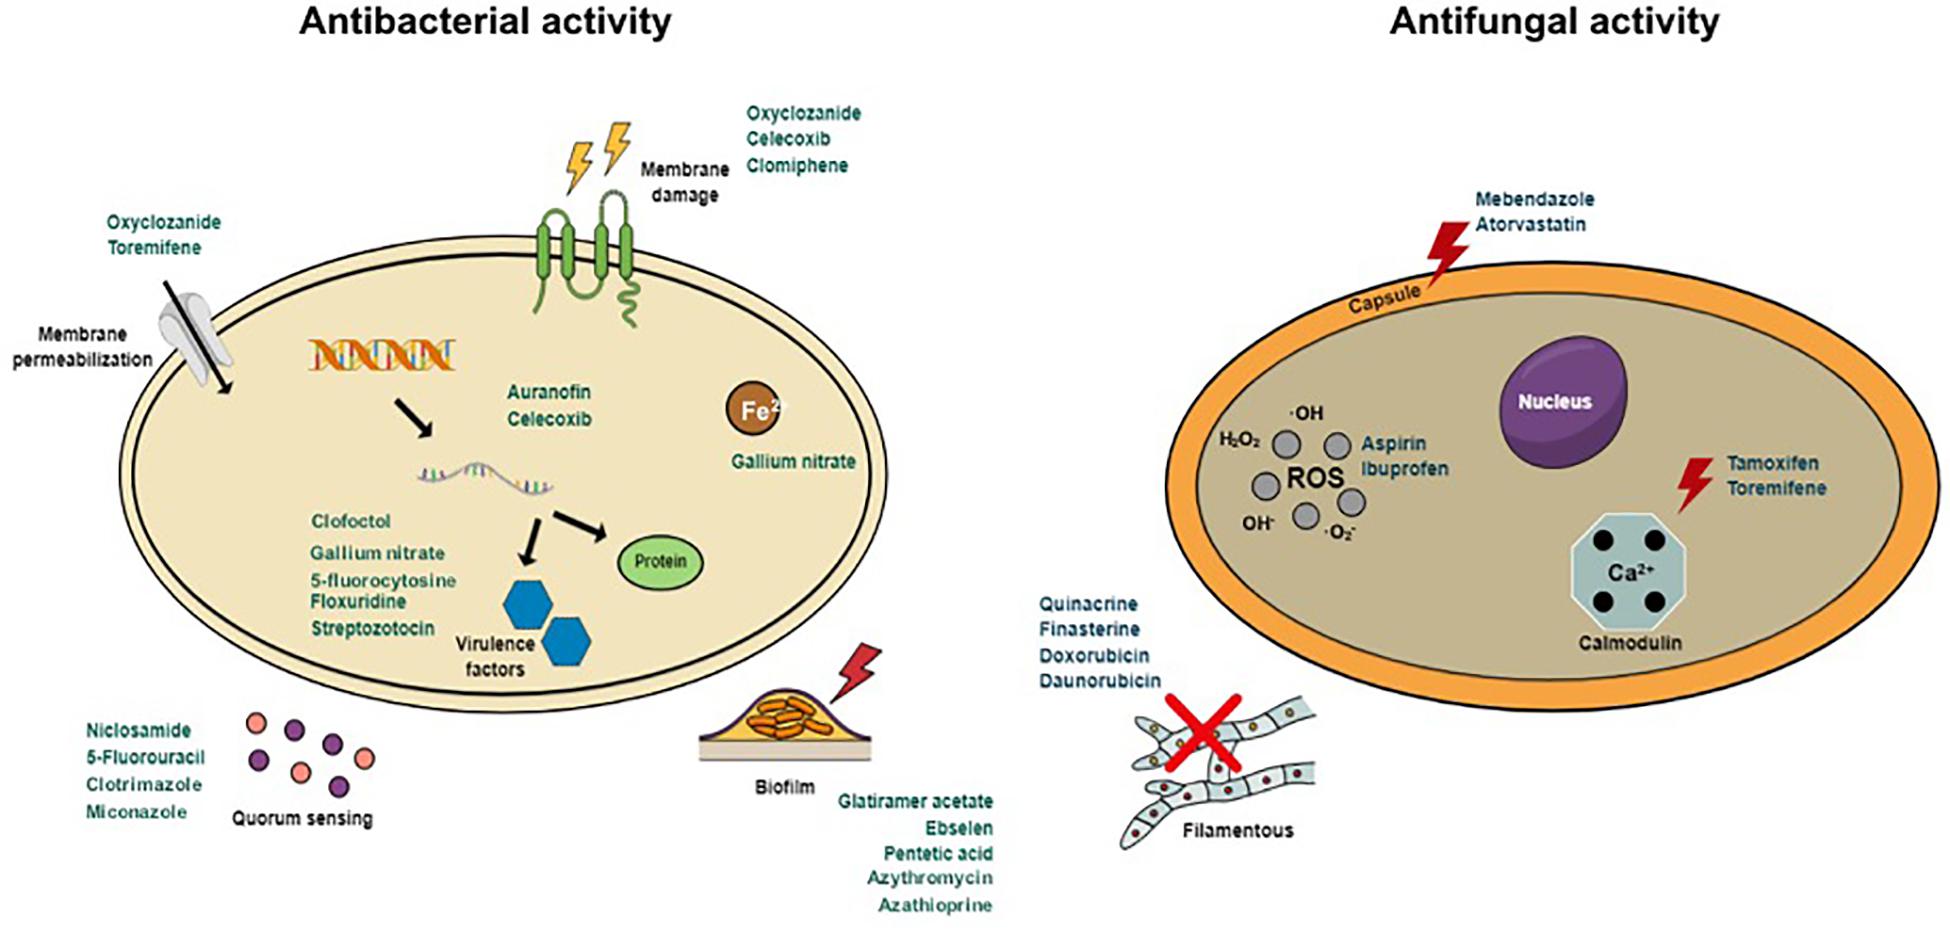 Frontiers Drug Repurposing For The Treatment Of Bacterial And Fungal Infections Microbiology